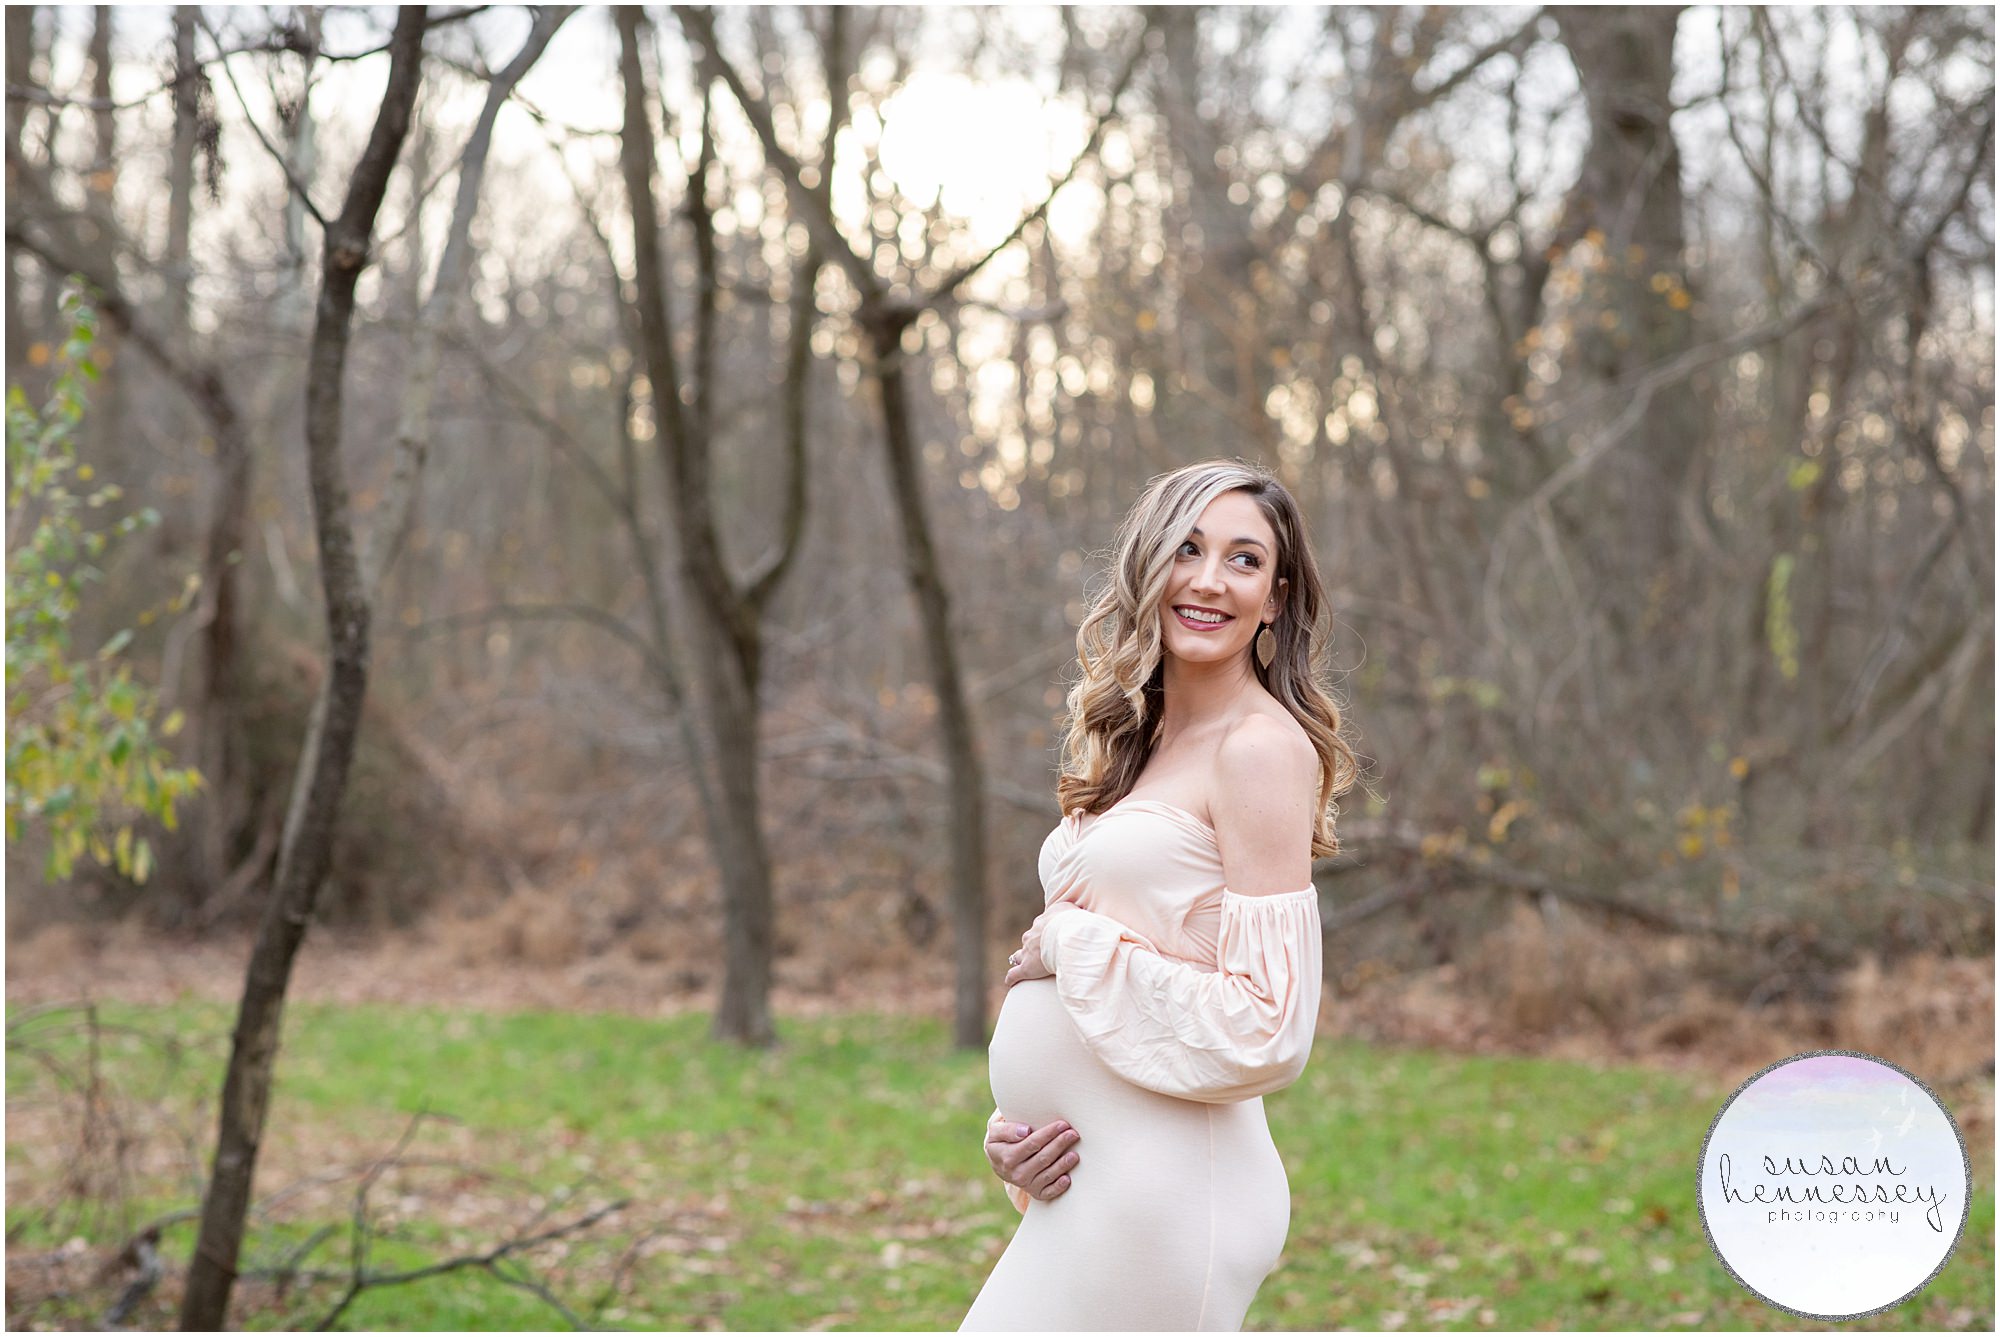 Susan Hennessey Photography is a South Jersey based photographer who offers a bump to baby collection for parents looking for a maternity and newborn session.